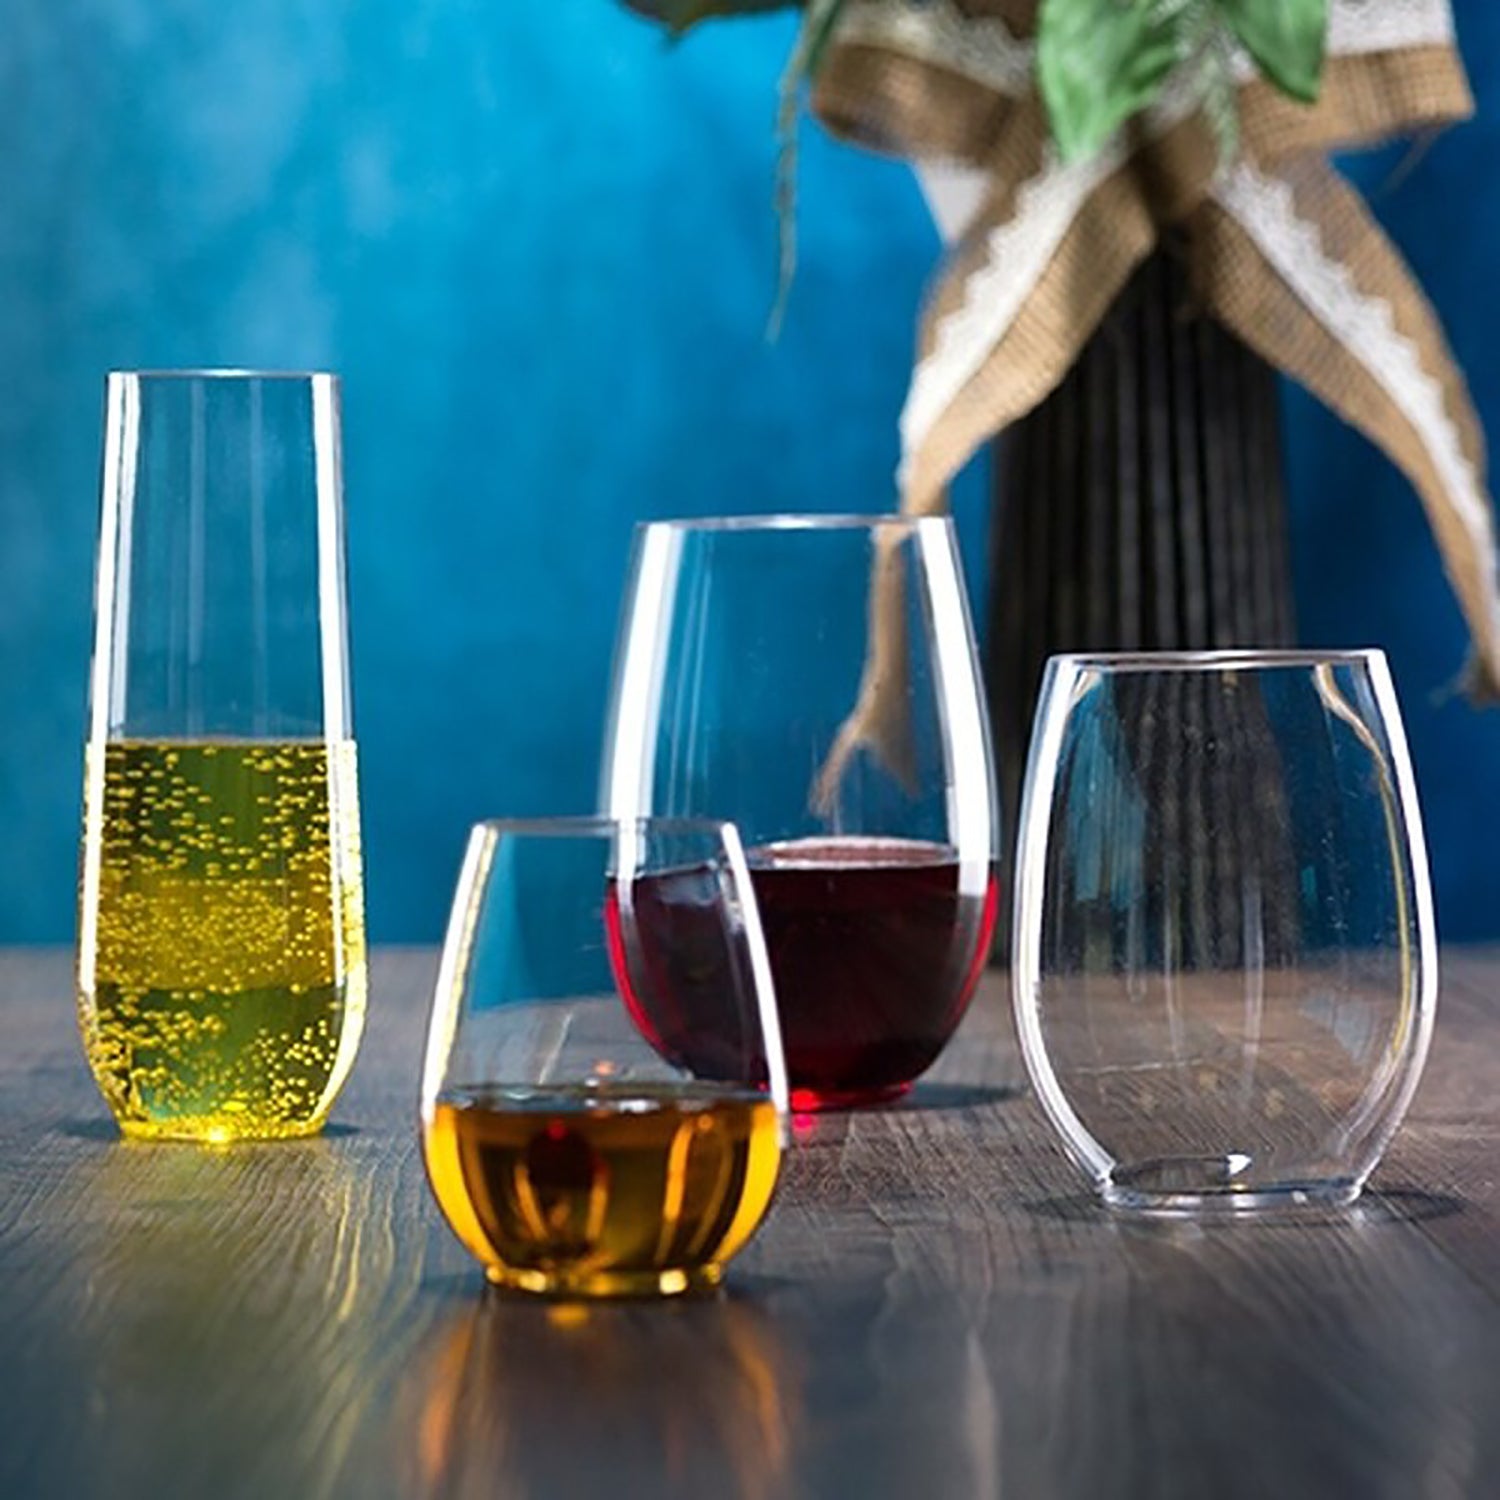 12oz. Clear Plastic Stemless Wine Glasses by Celebrate It™, 20ct